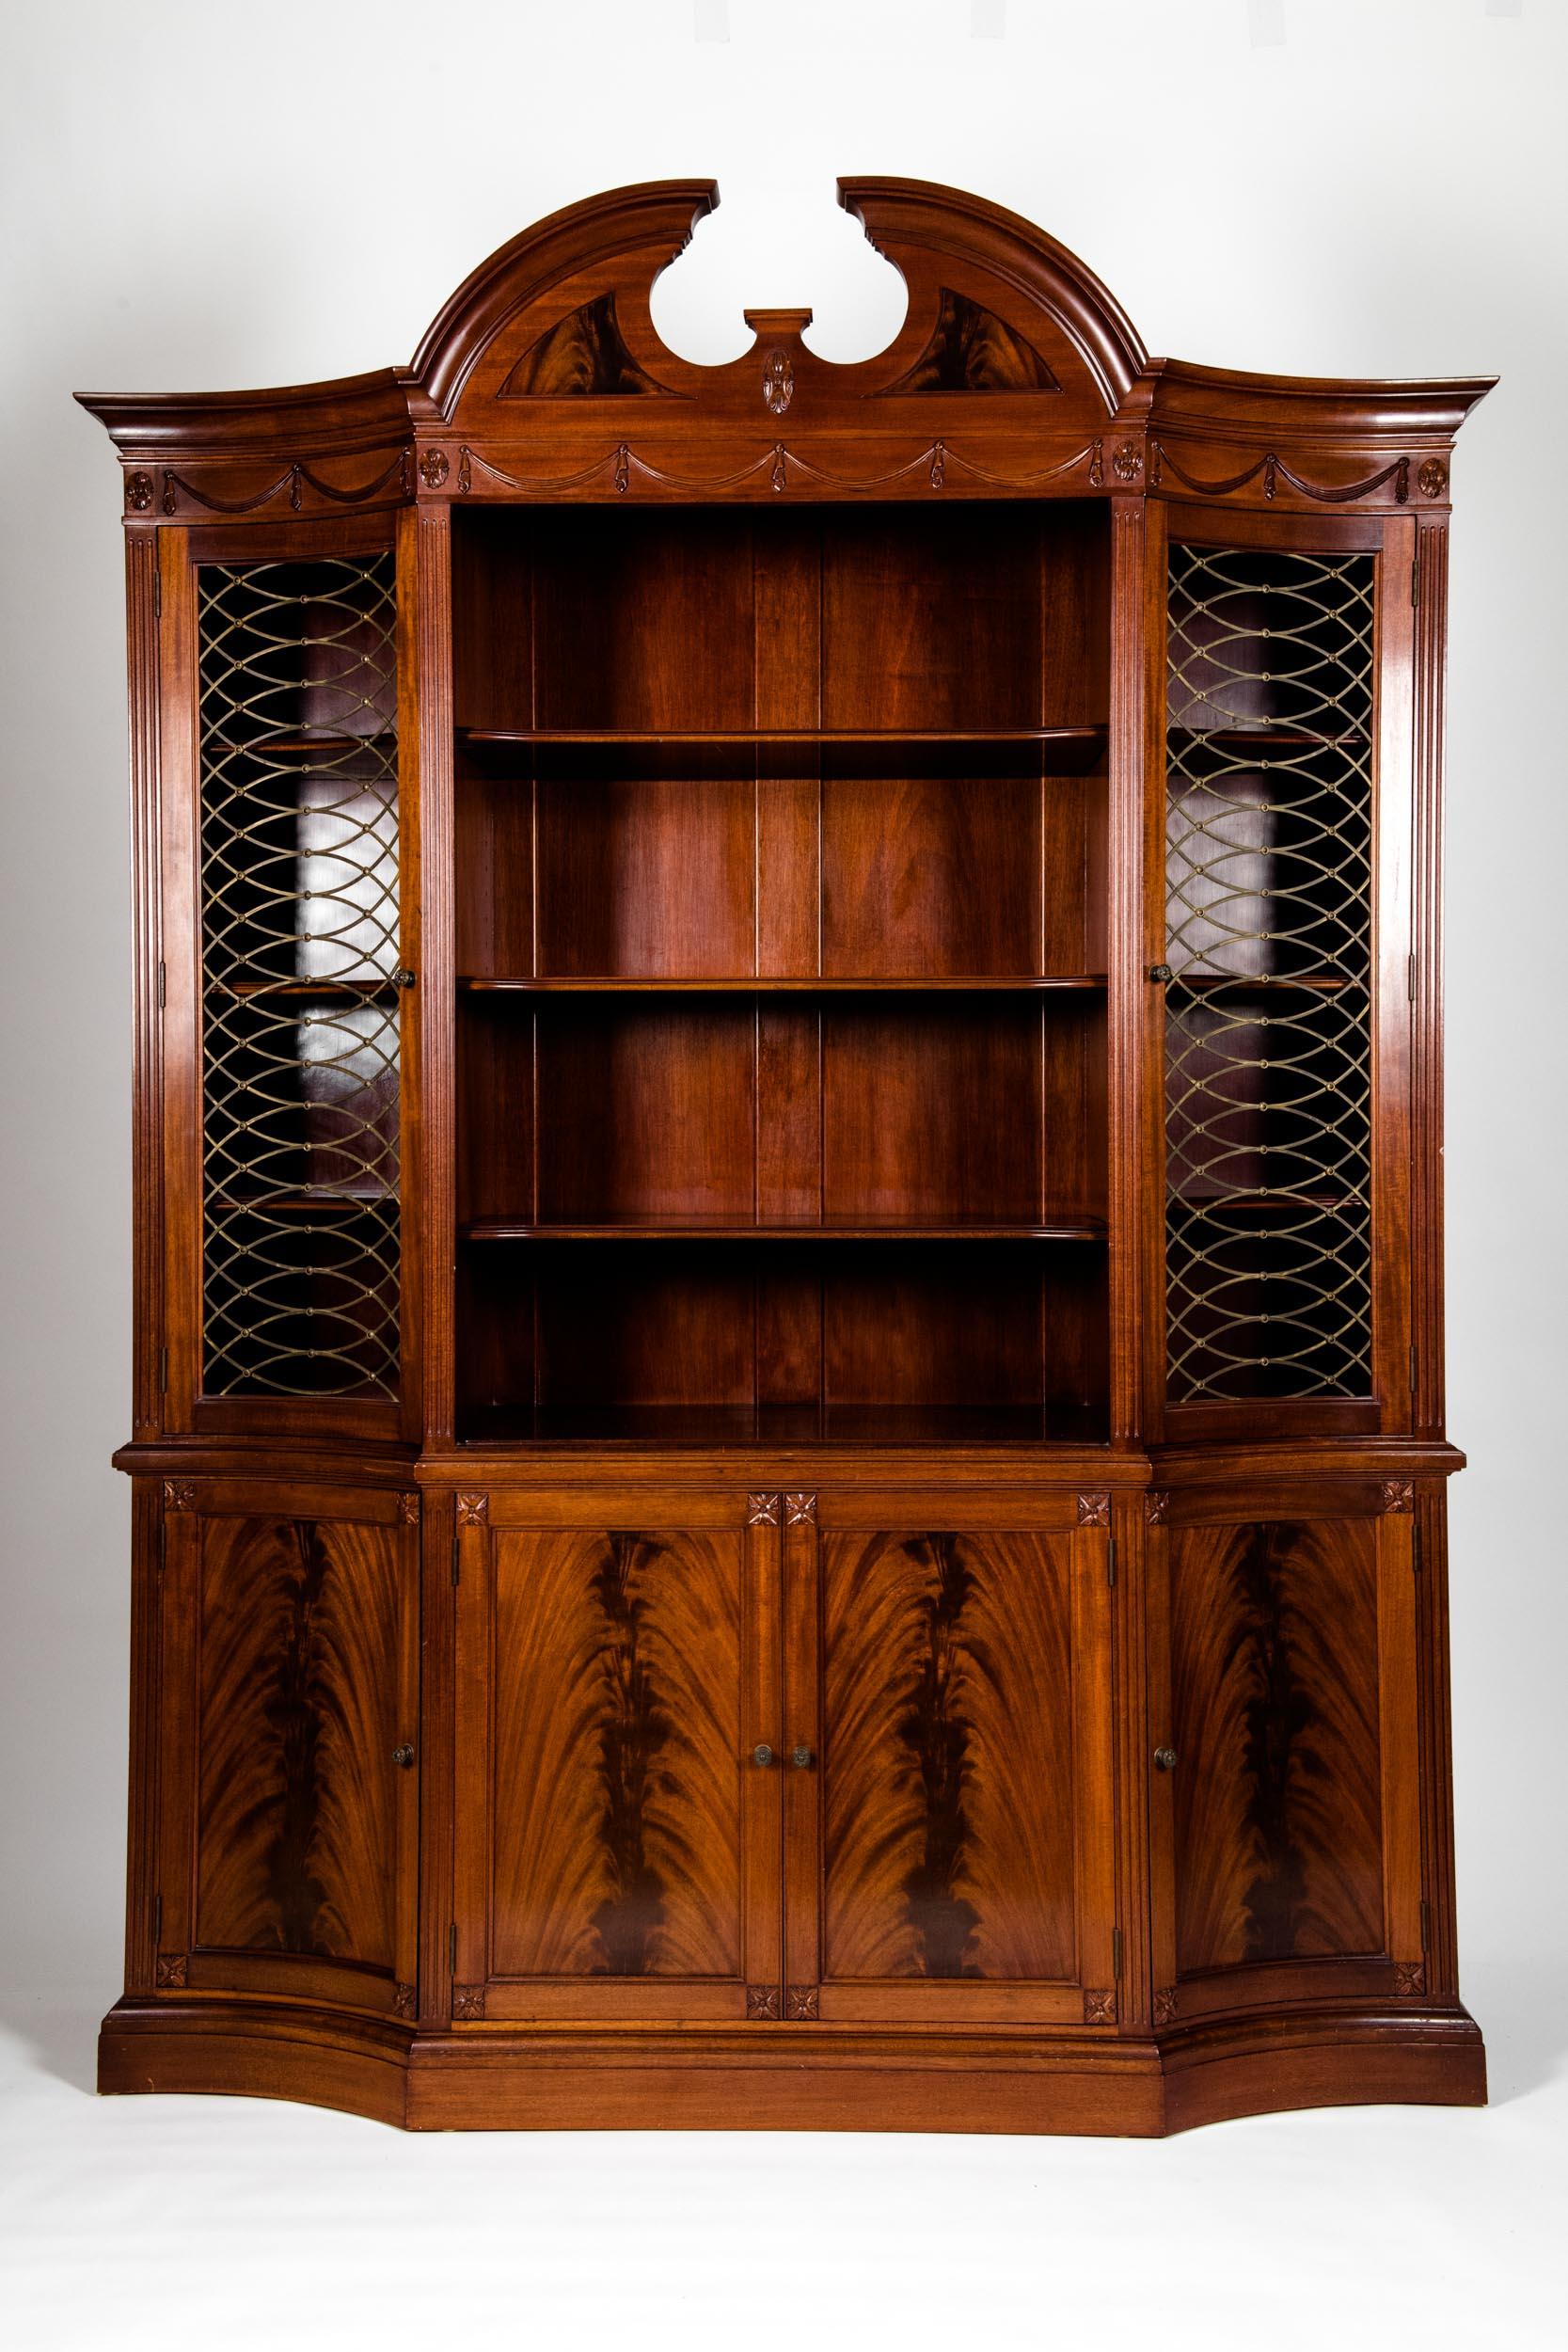 Handmade 20th century mahogany wood breakfront or cabinet with arch top and carved design details. Two parts, upper section with pediment top over swag carved panel with four shelves flanked by grill work side doors. Stand on base with four doors.